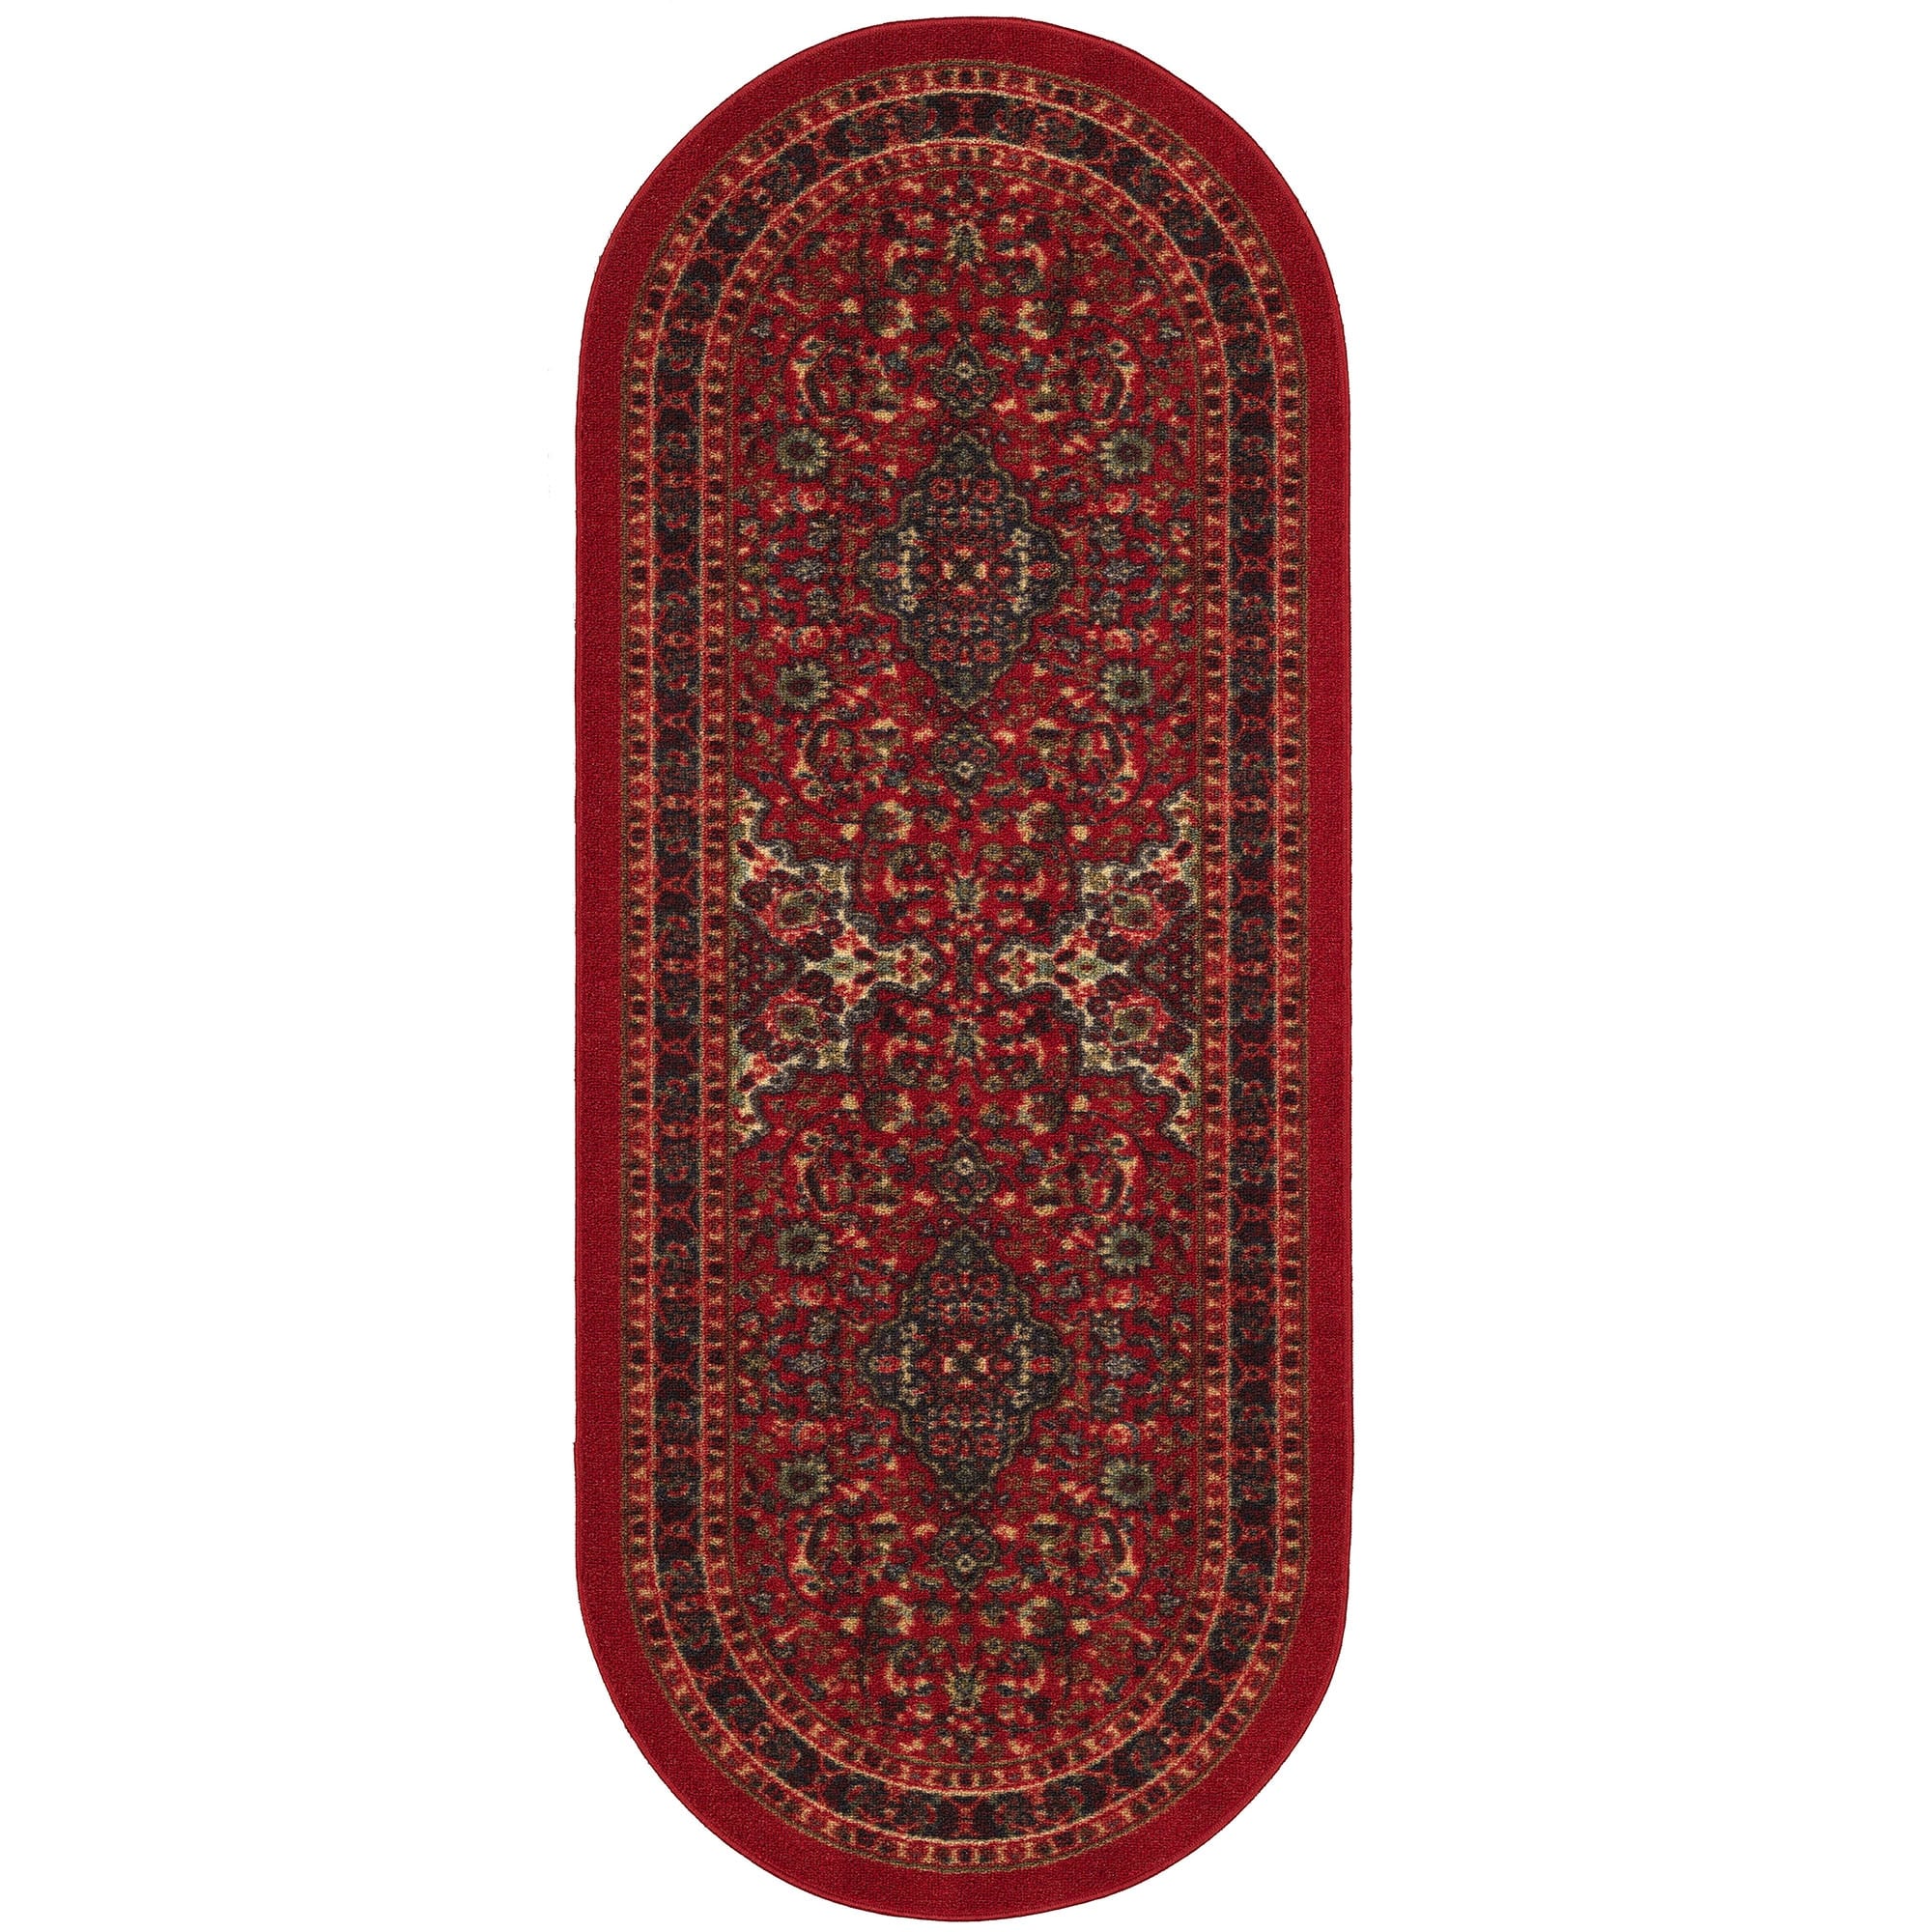 https://ak1.ostkcdn.com/images/products/is/images/direct/782155d84deffa95a5dd0684fedf840b695760db/Ottomanson-Classics-Collection-Persian-Oriental-Heriz-Design-Rugs.jpg